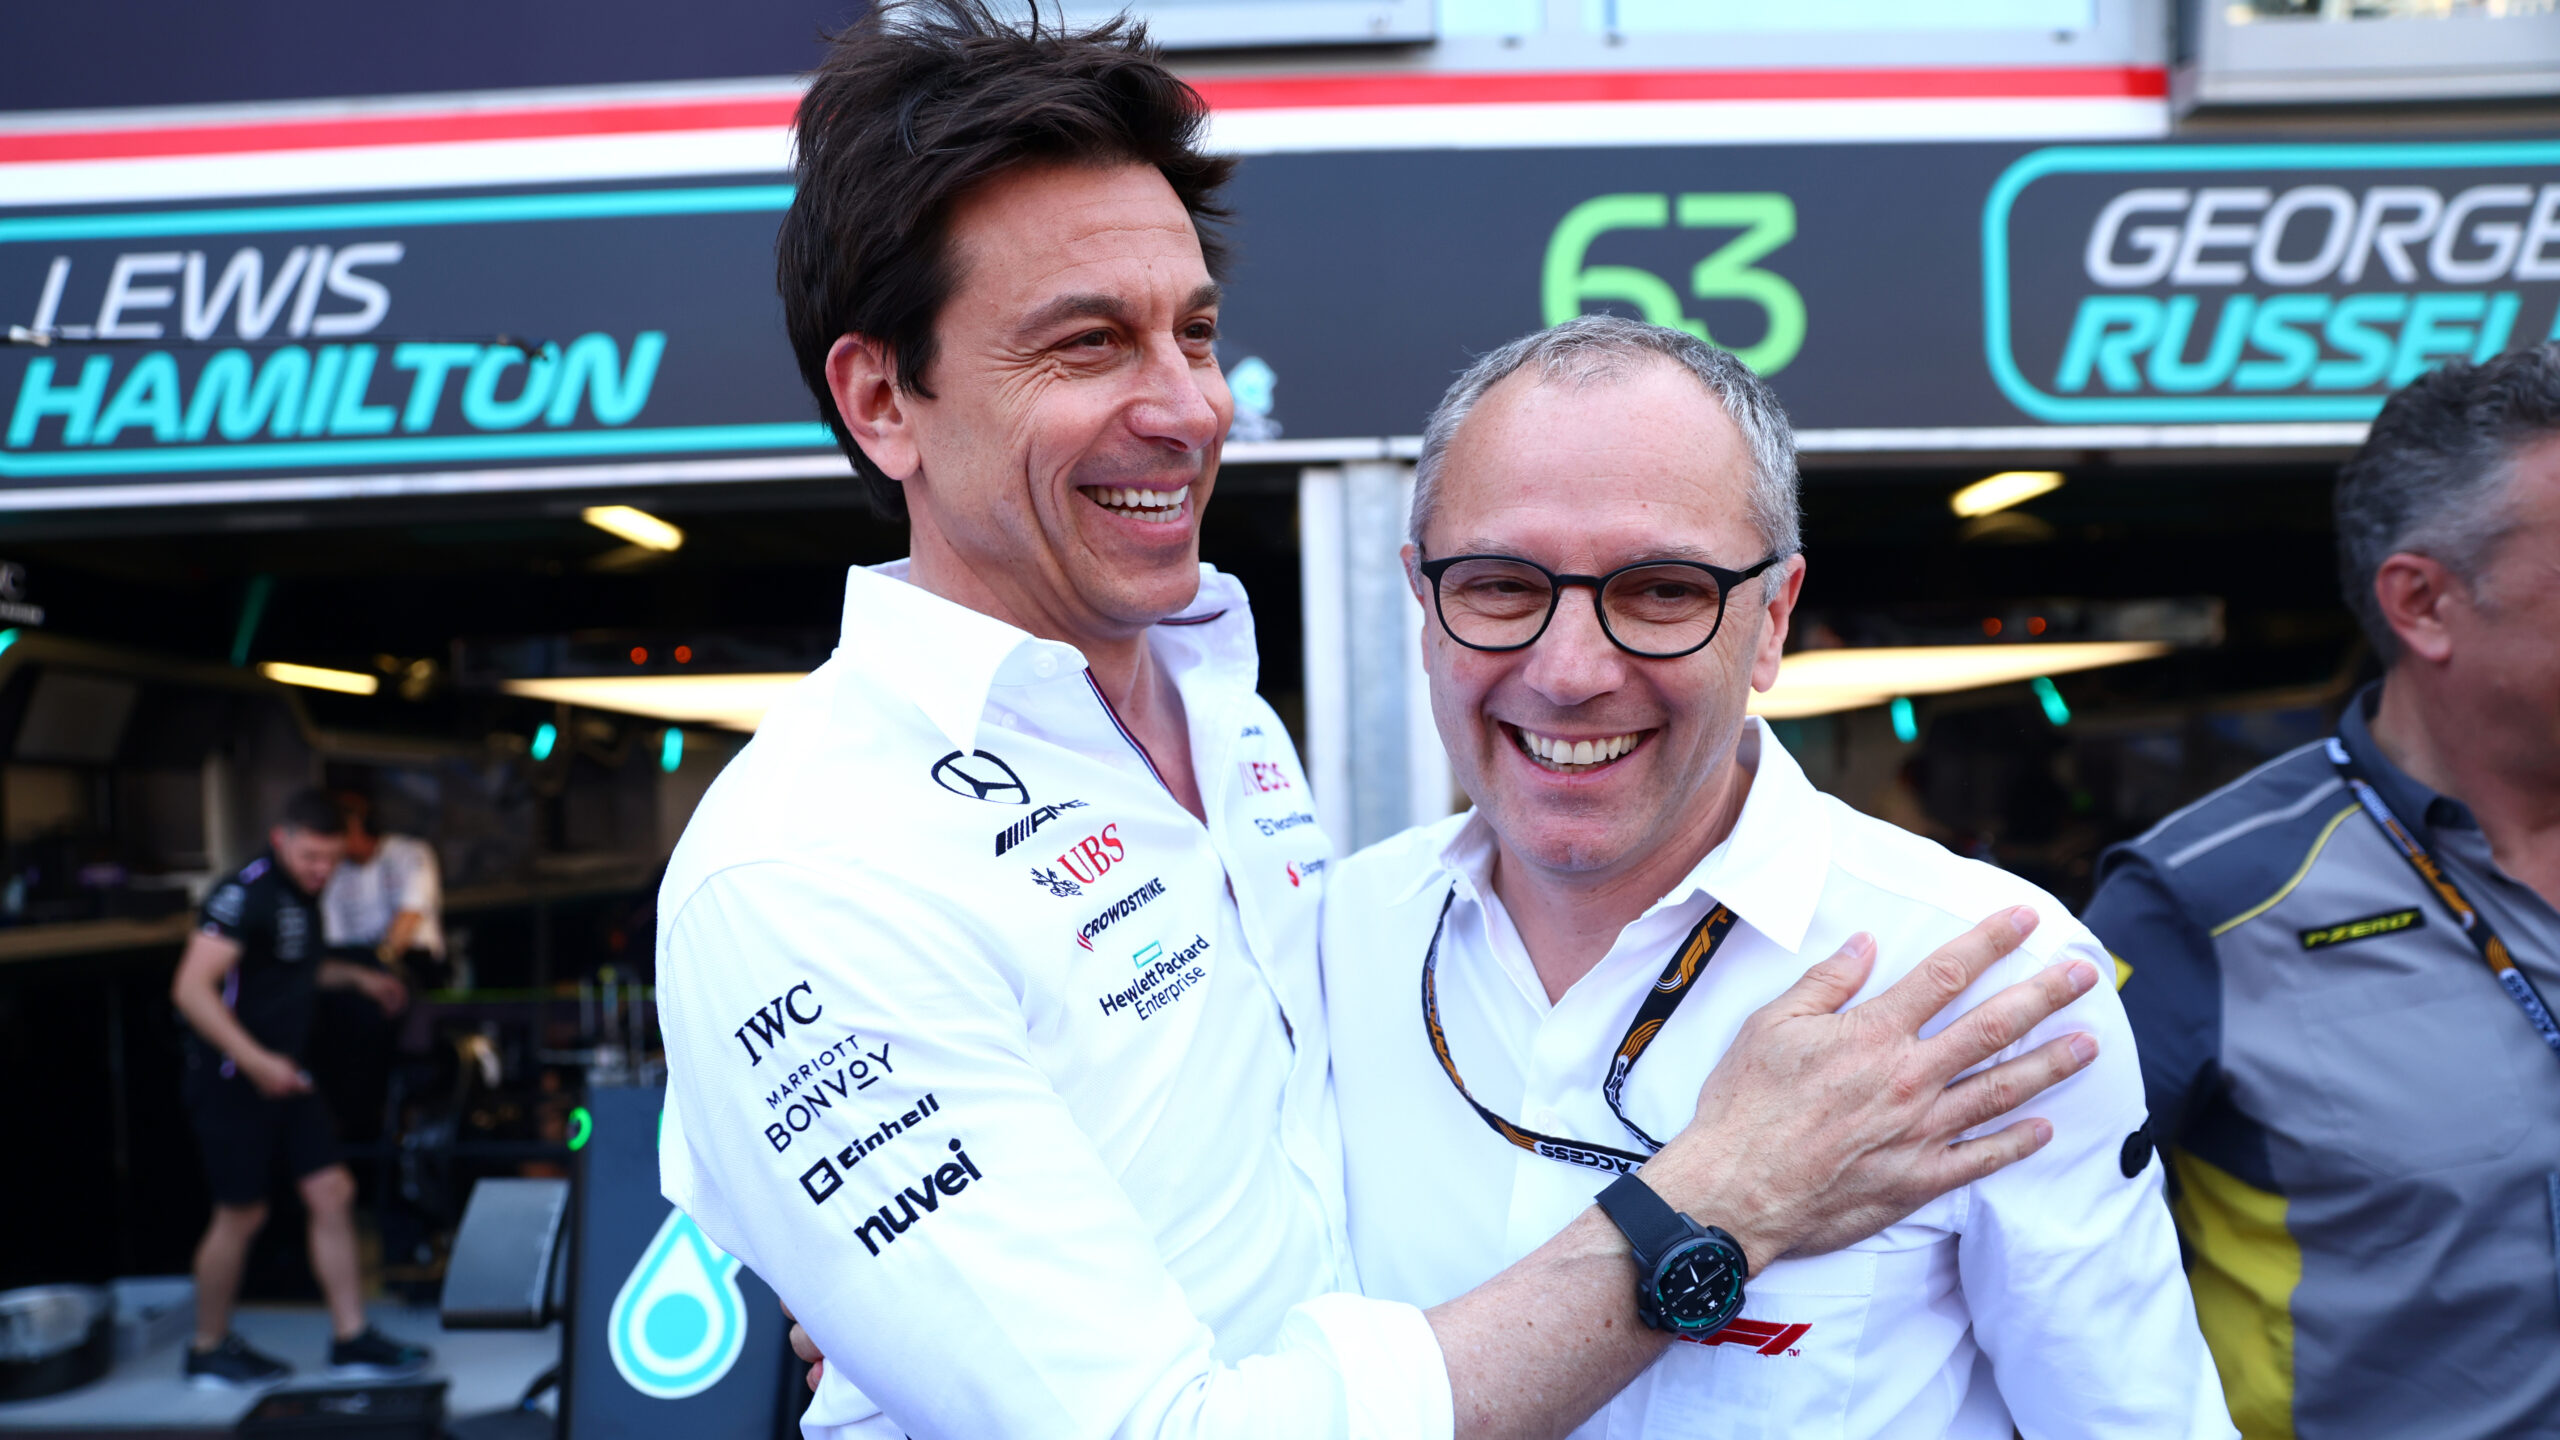 MONTE-CARLO, MONACO - MAY 27: Mercedes GP Executive Director Toto Wolff talks with Stefano Domenicali, CEO of the Formula One Group, during qualifying ahead of the F1 Grand Prix of Monaco at Circuit de Monaco on May 27, 2023 in Monte-Carlo, Monaco. (Photo by Dan Istitene - Formula 1/Formula 1 via Getty Images)